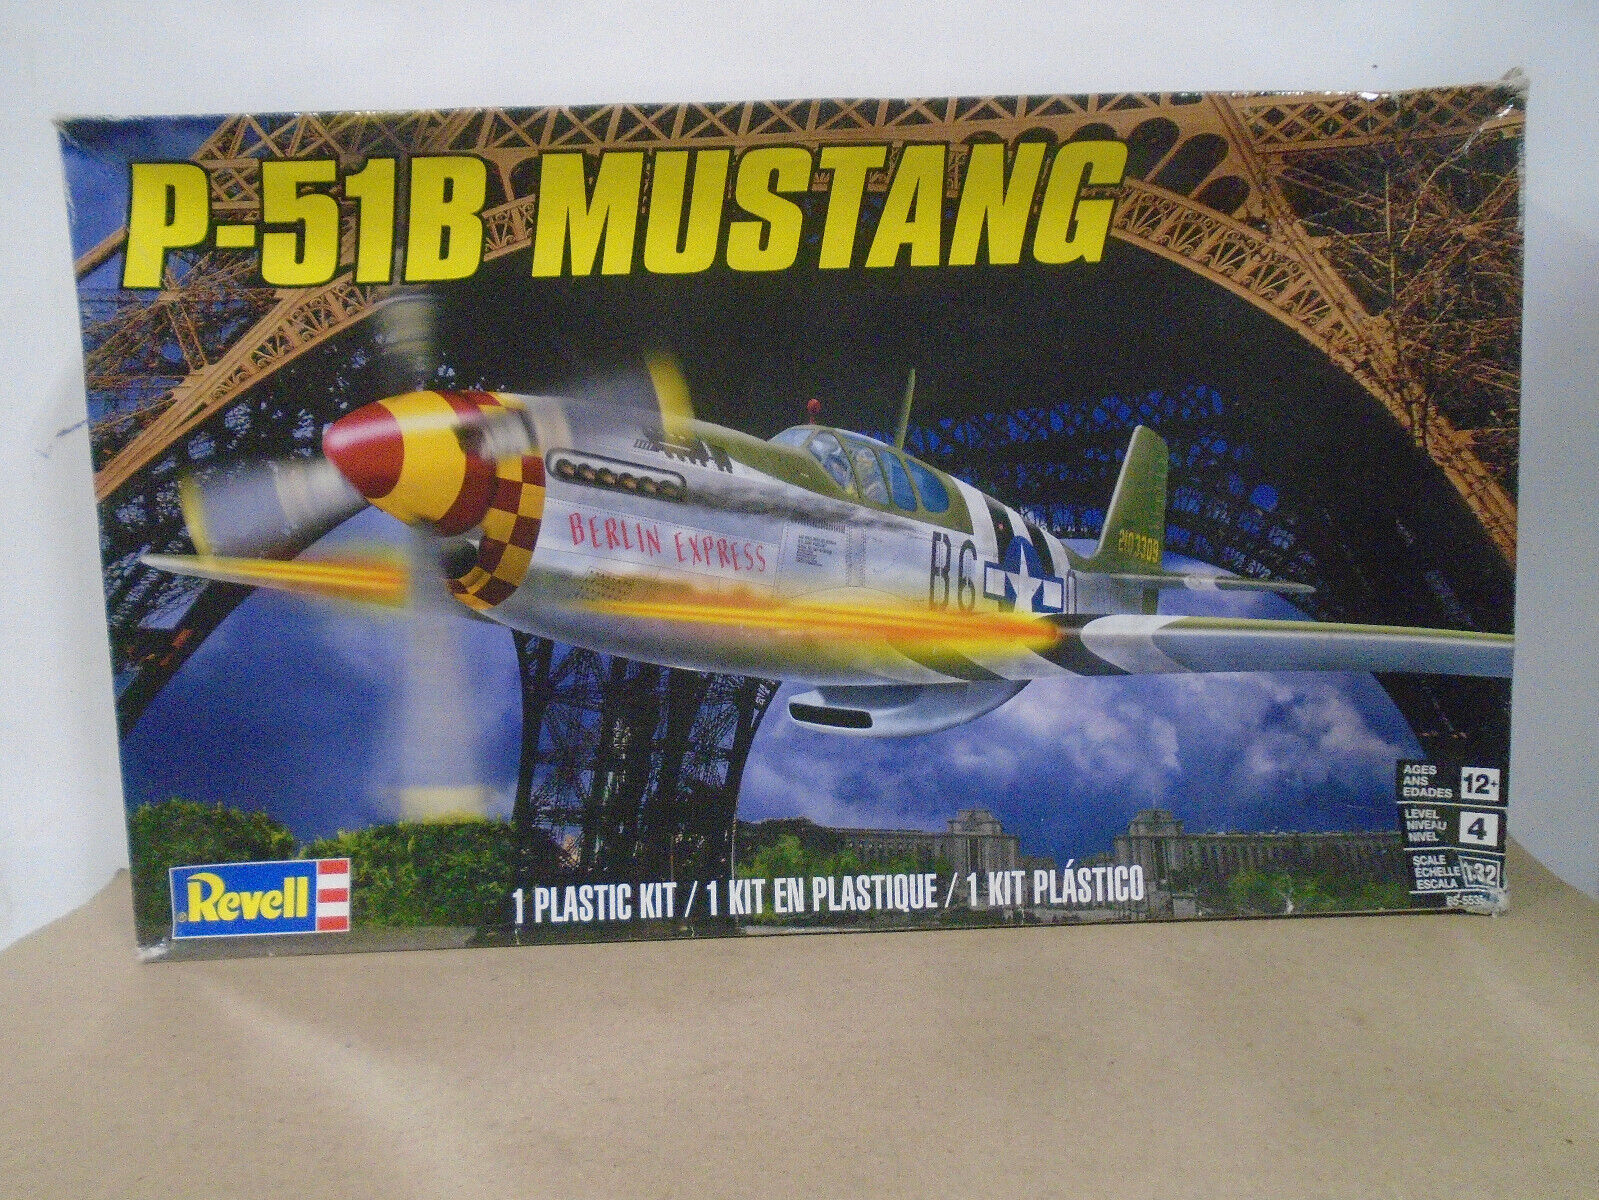 REVELL #5535 1/32 SCALE P-51B MUSTANG NEW IN DAMAGED BOX